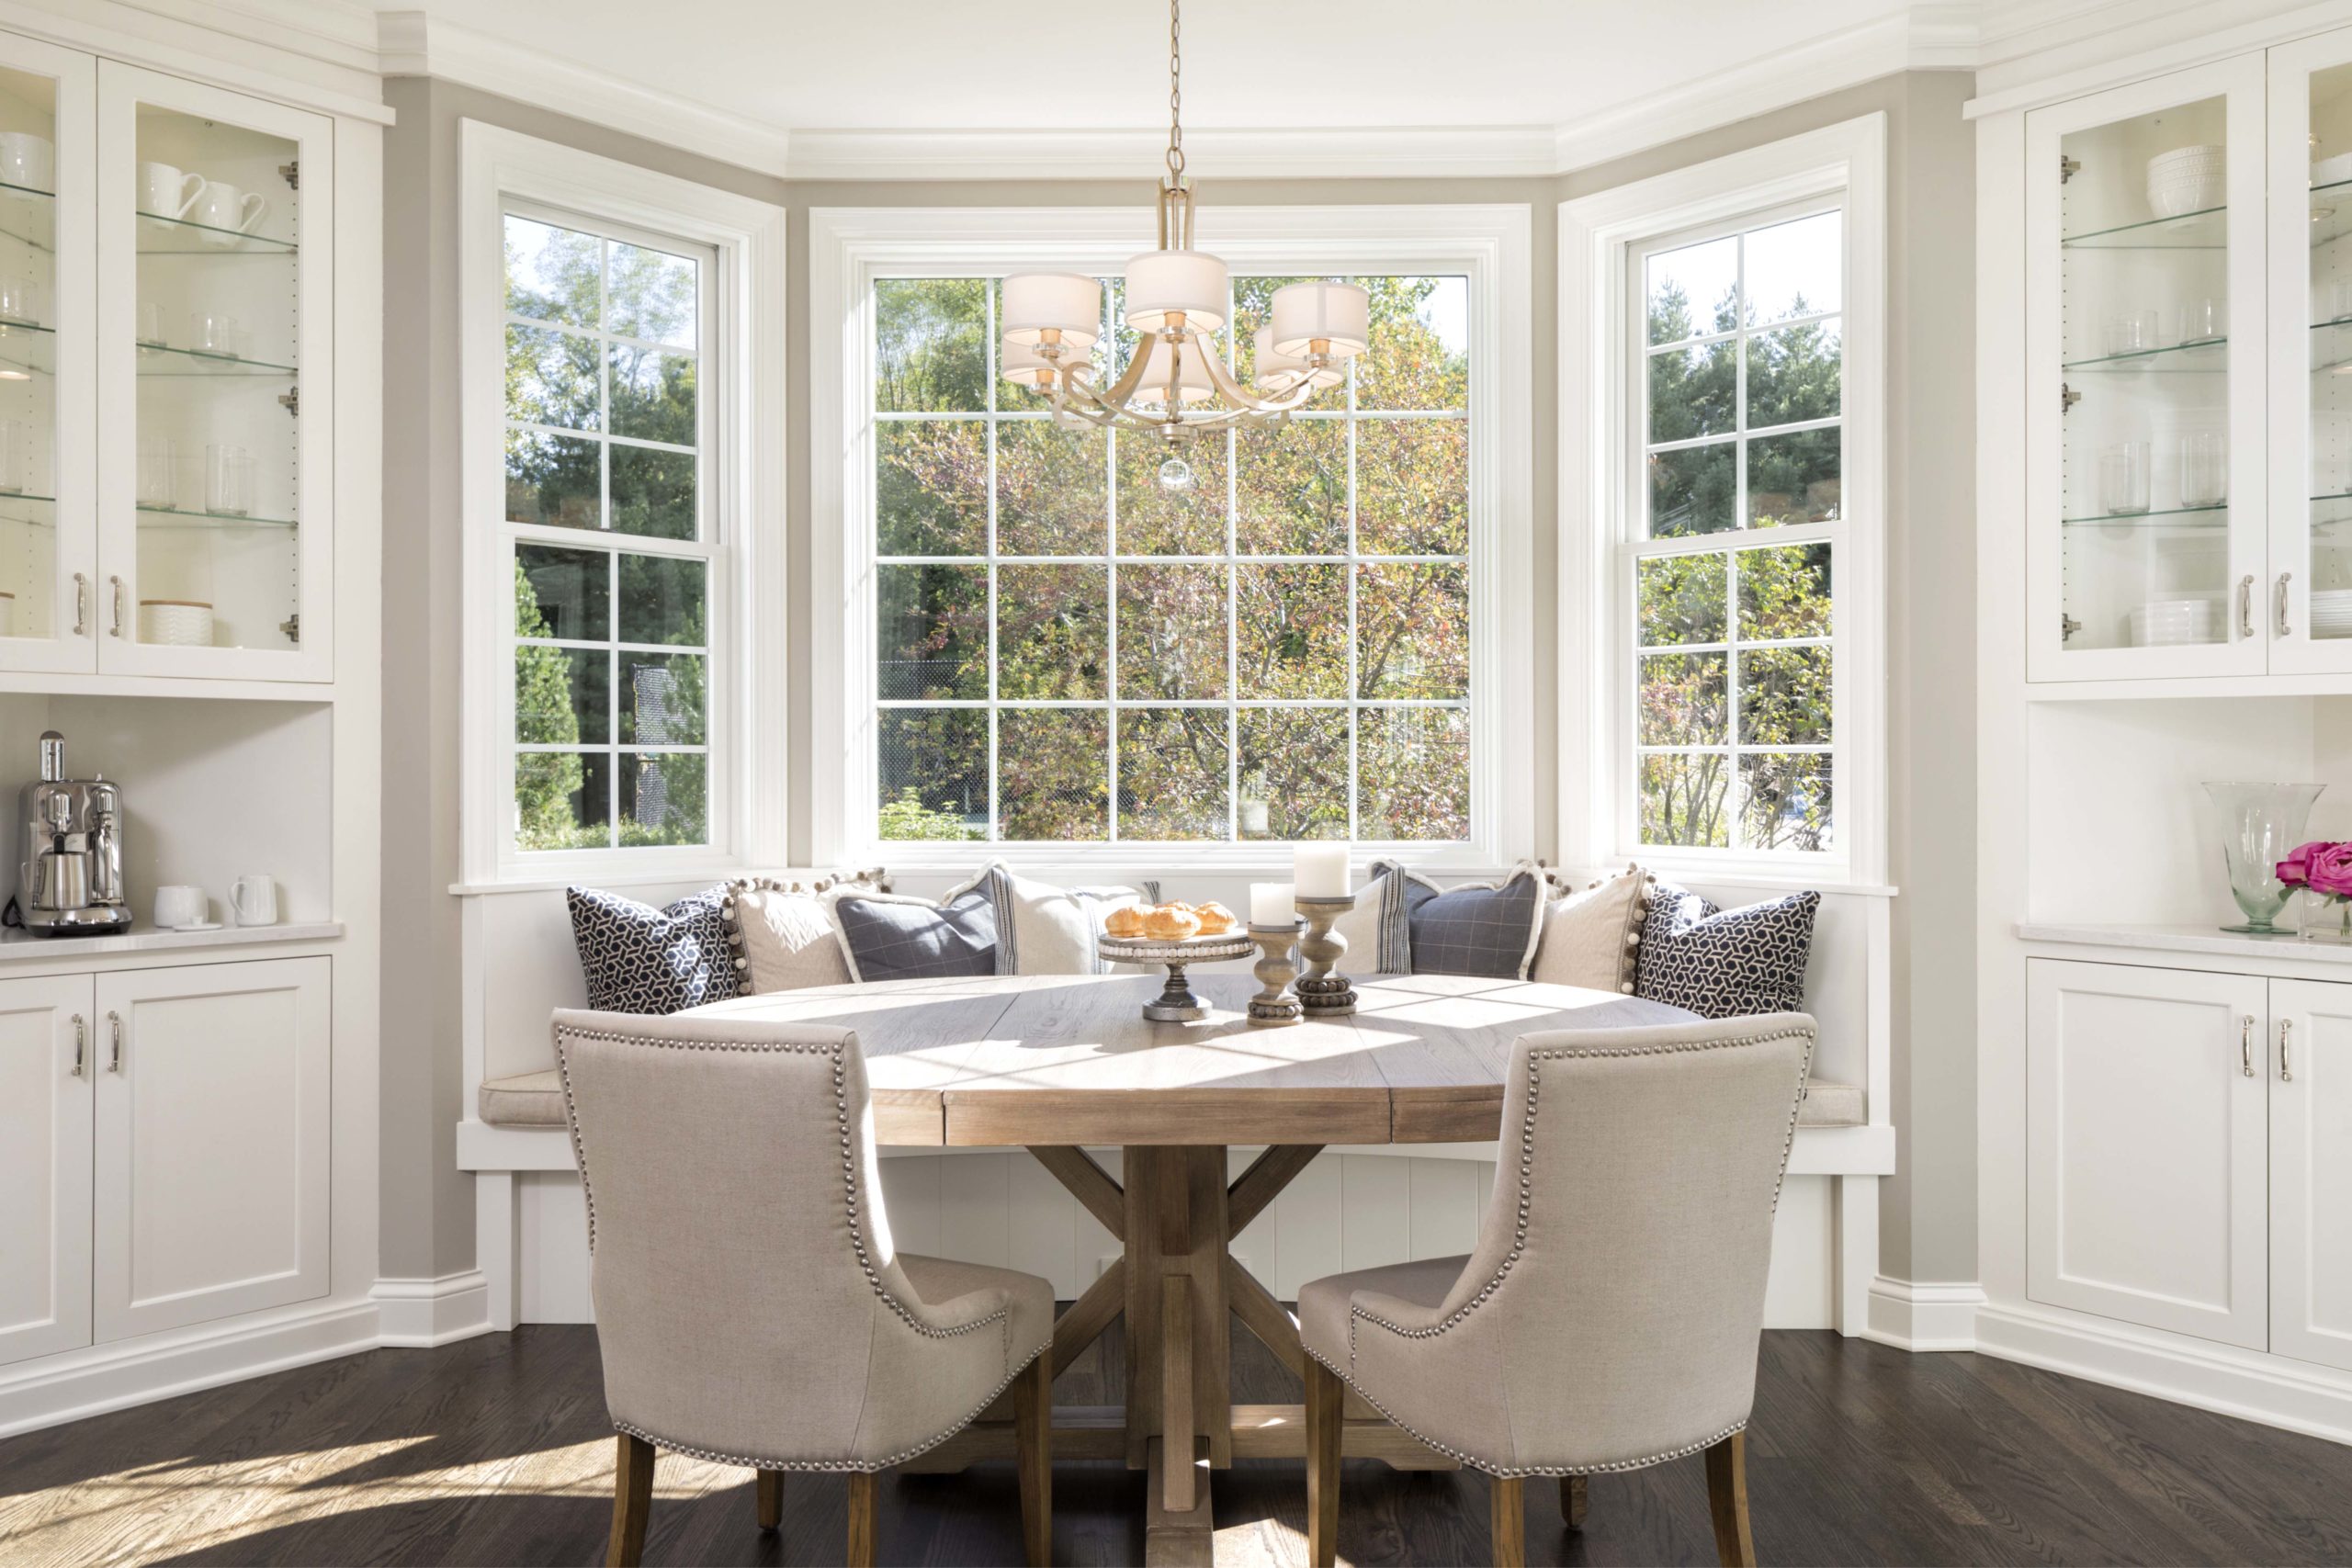 breakfast nook in kitchen with white bench, accent pillows, and tan chairs around the table